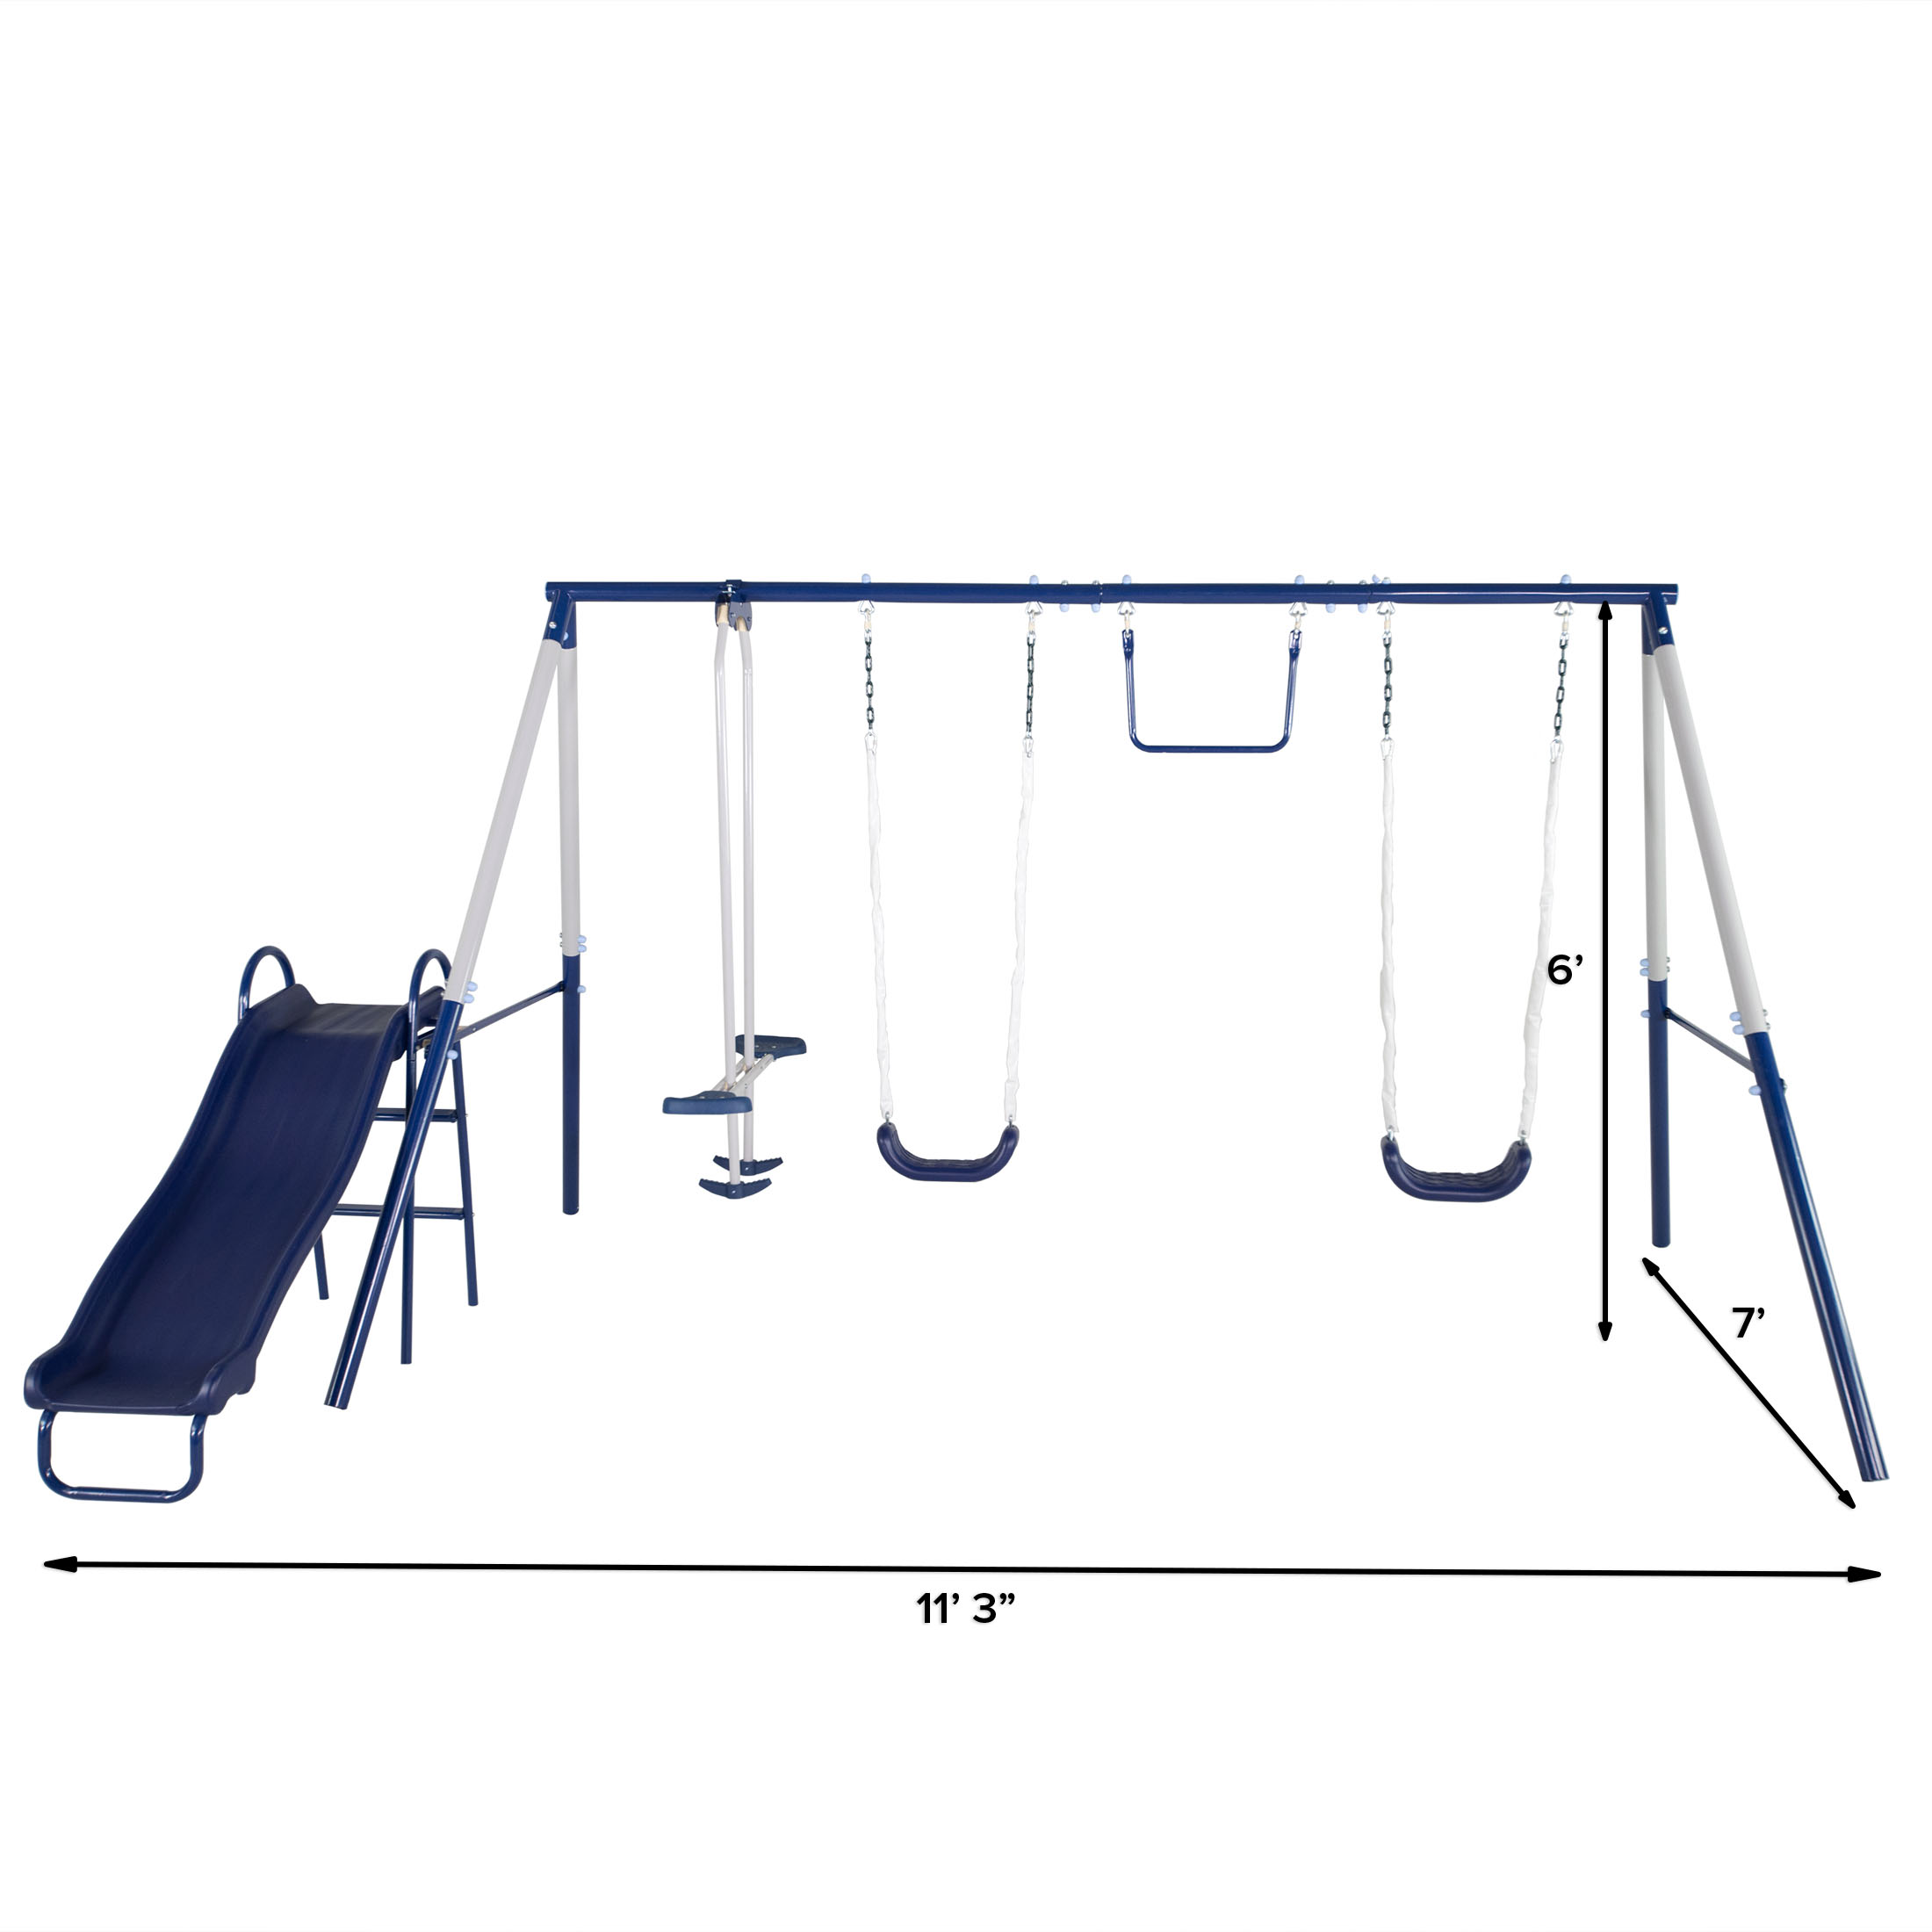 Sportspower Arcadia Metal Swing Set with Trapeze, 2 Person Glider Swing, and Lifetime Warranty on Blow Molded Slide - image 8 of 11